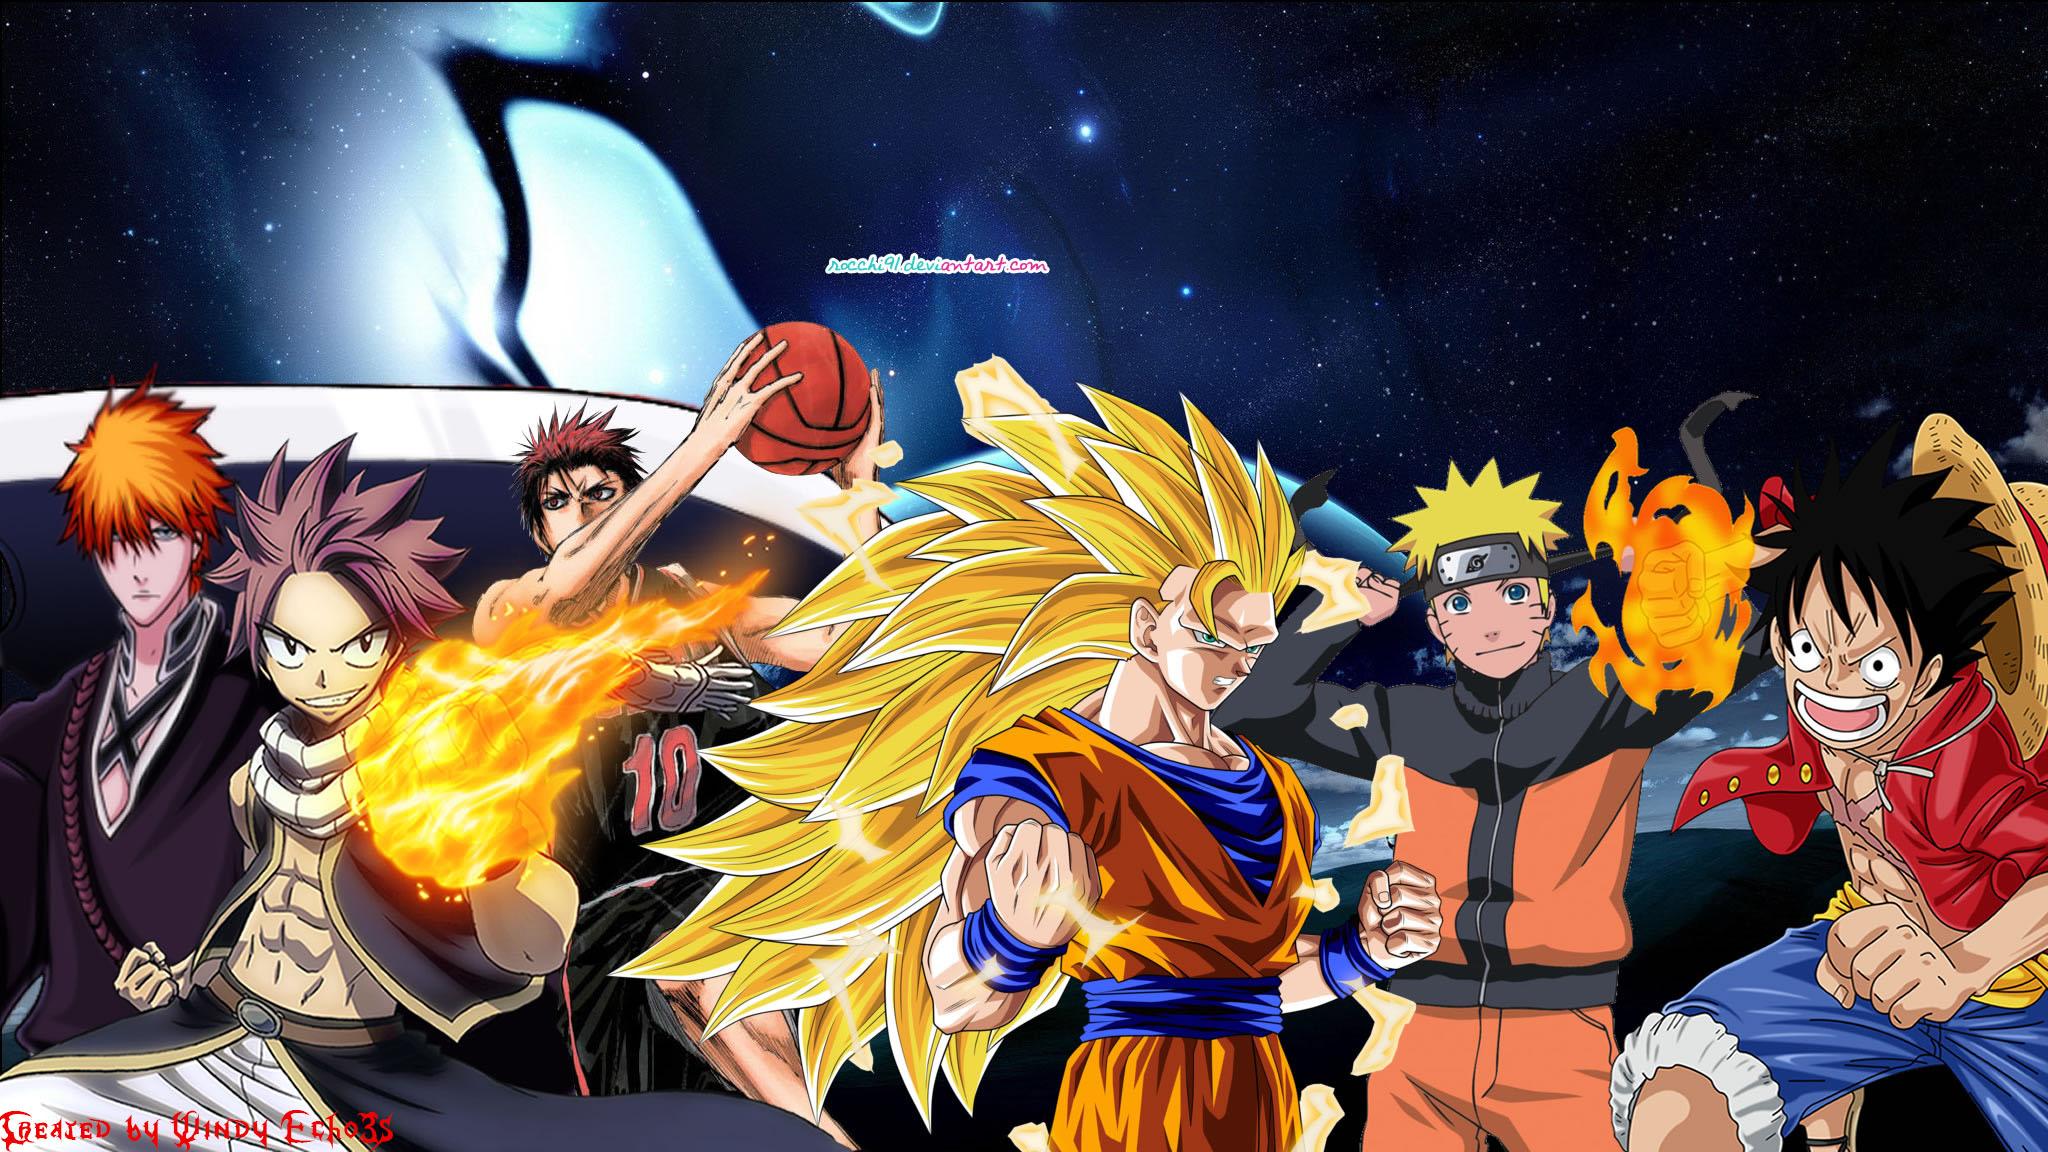 2048 x 1152 · jpeg - Anime Collaboration Wallpaper # 2 Goku and Friends by WindyEchoes on ...